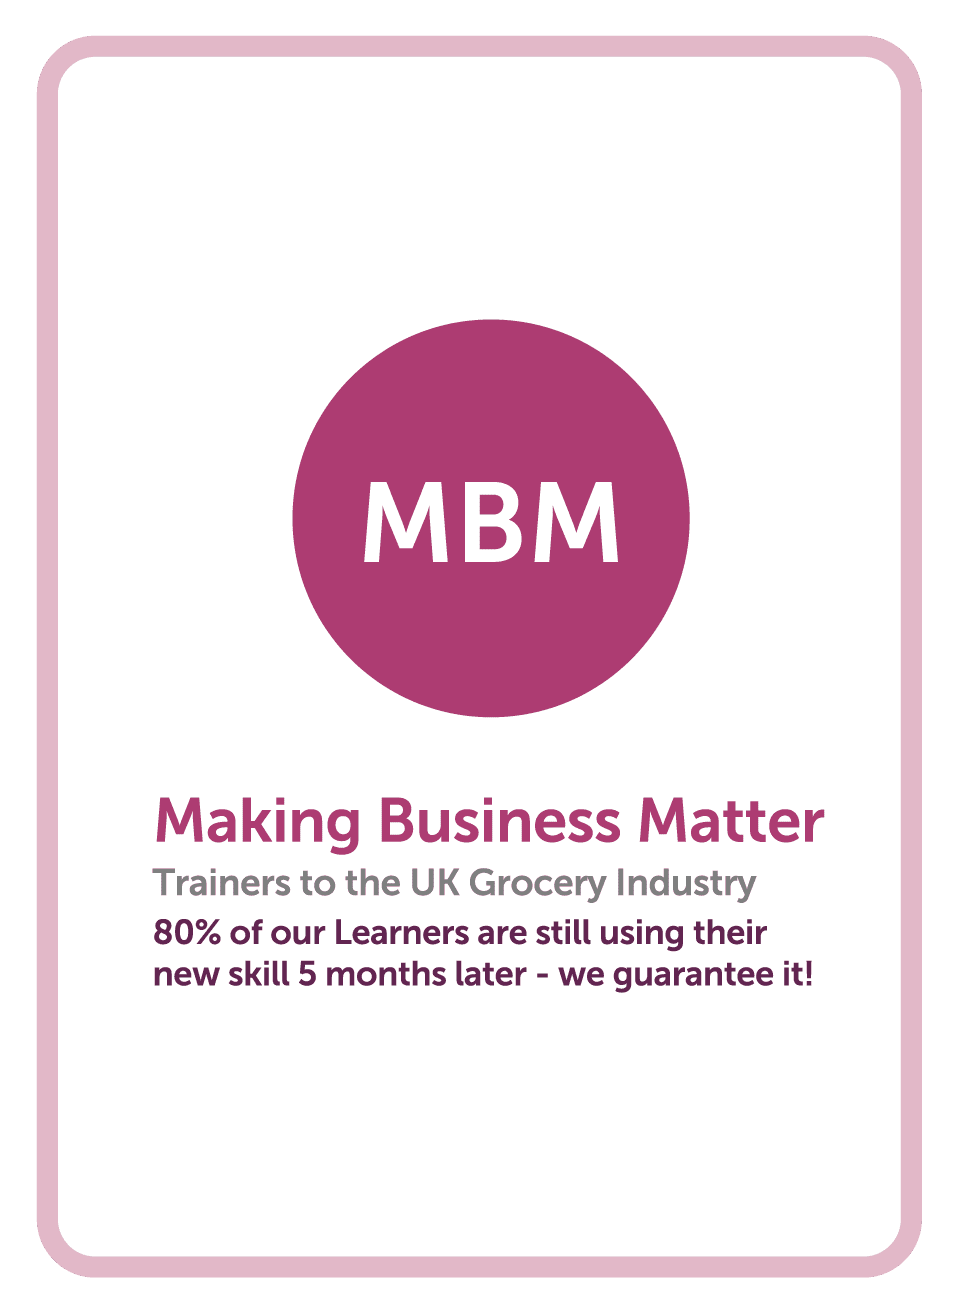 Coaching card with MBM logo in the centre